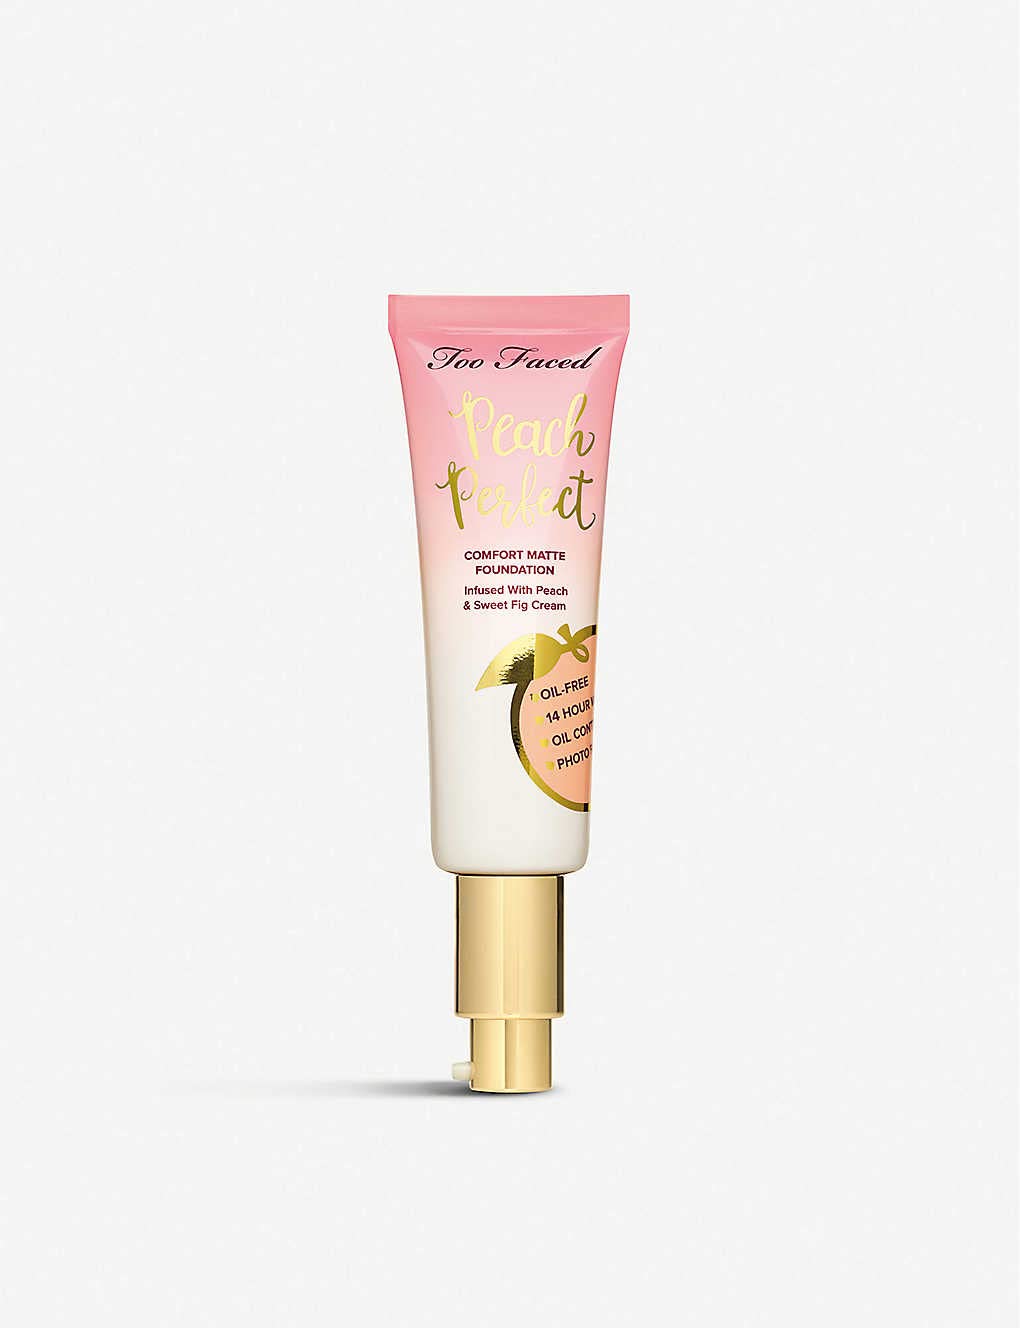 TOO FACED PEACH PERFECT COMFORT MATTE FOUNDATION 1.6 OZ / 48 ML - CLOUD